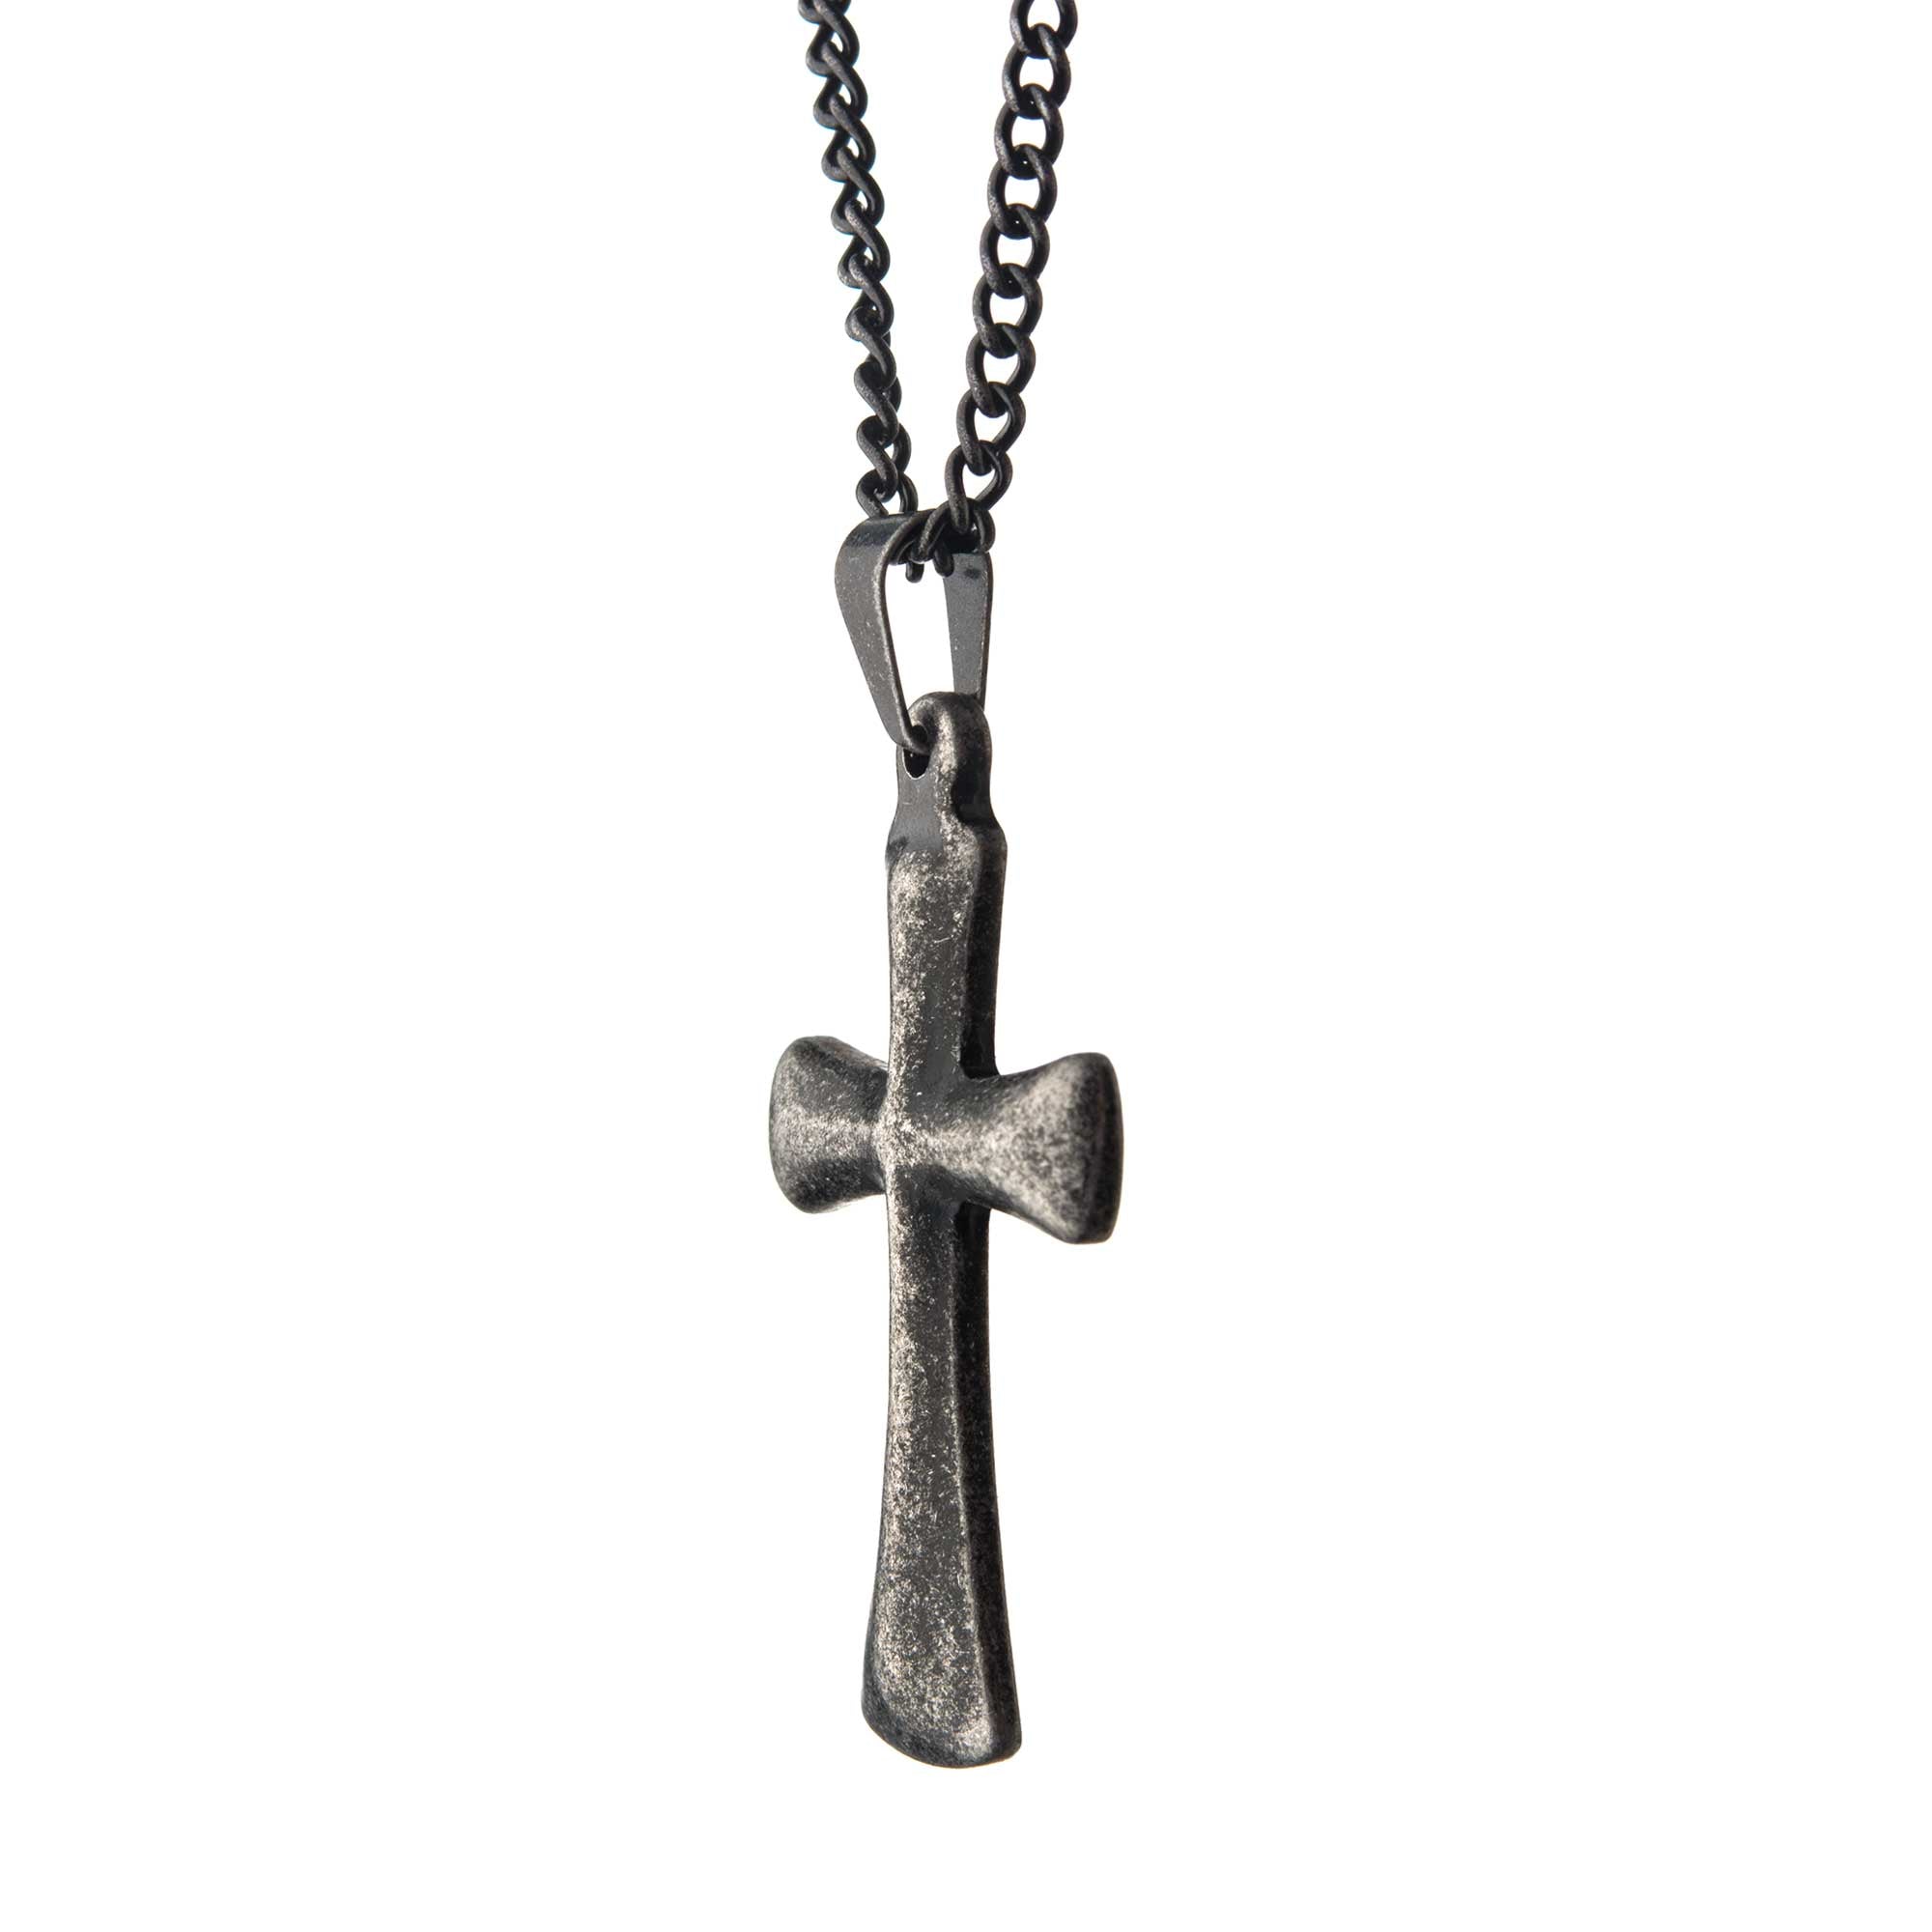 Stainless Steel Antique Cross Pendant with Curb Chain